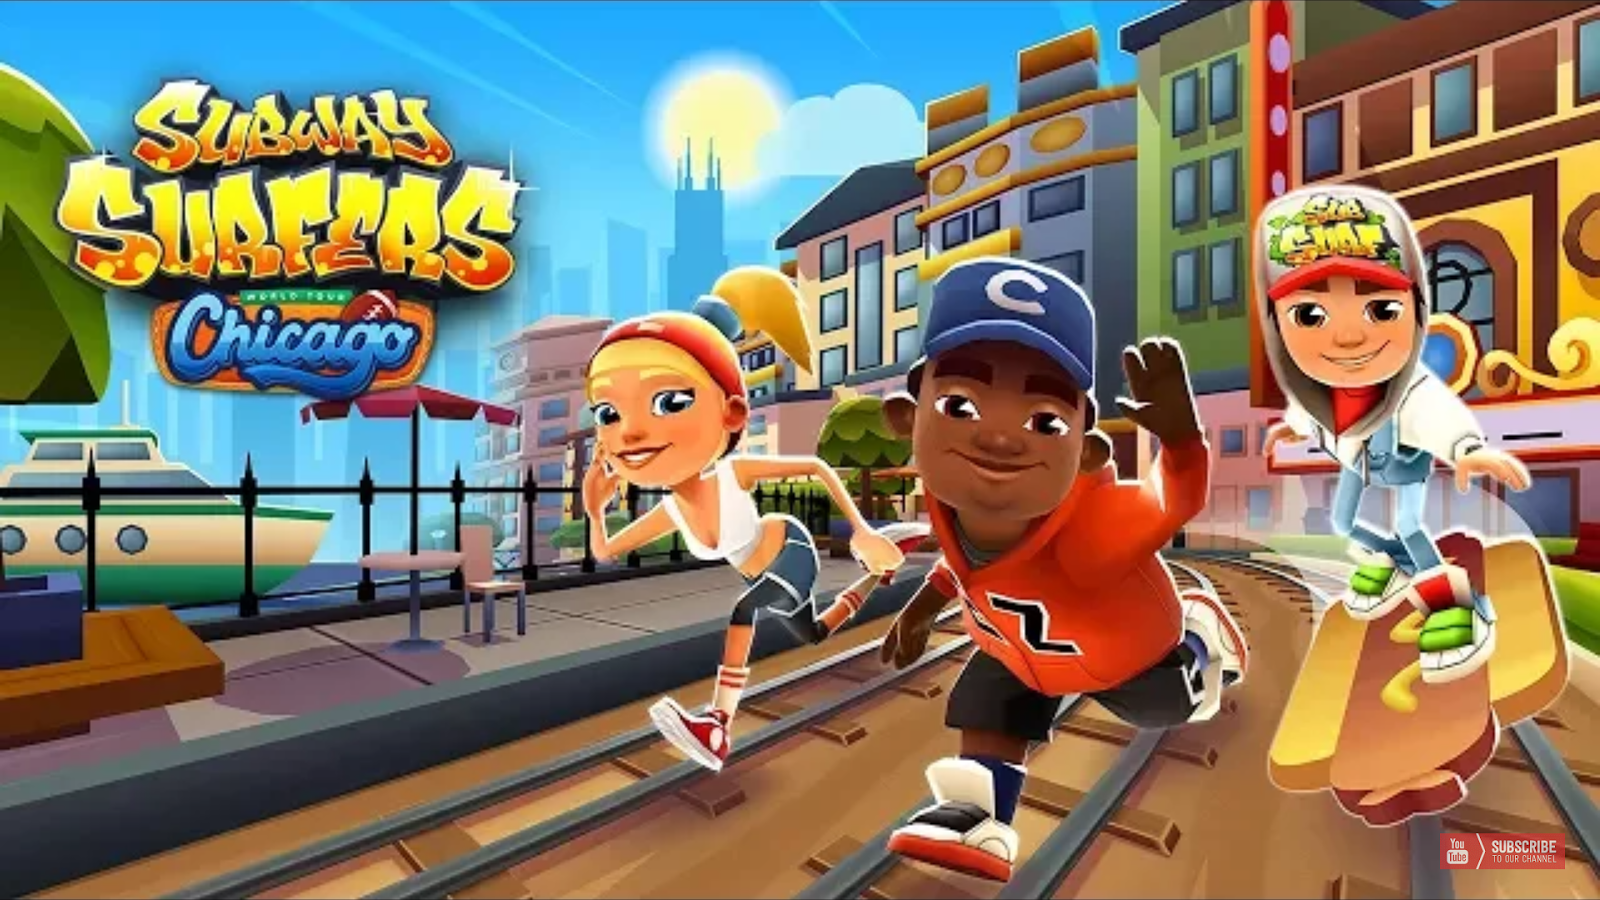 Subway Surfers 1.82.0 Modded apk Chicago (unlimited unlocked cheat)